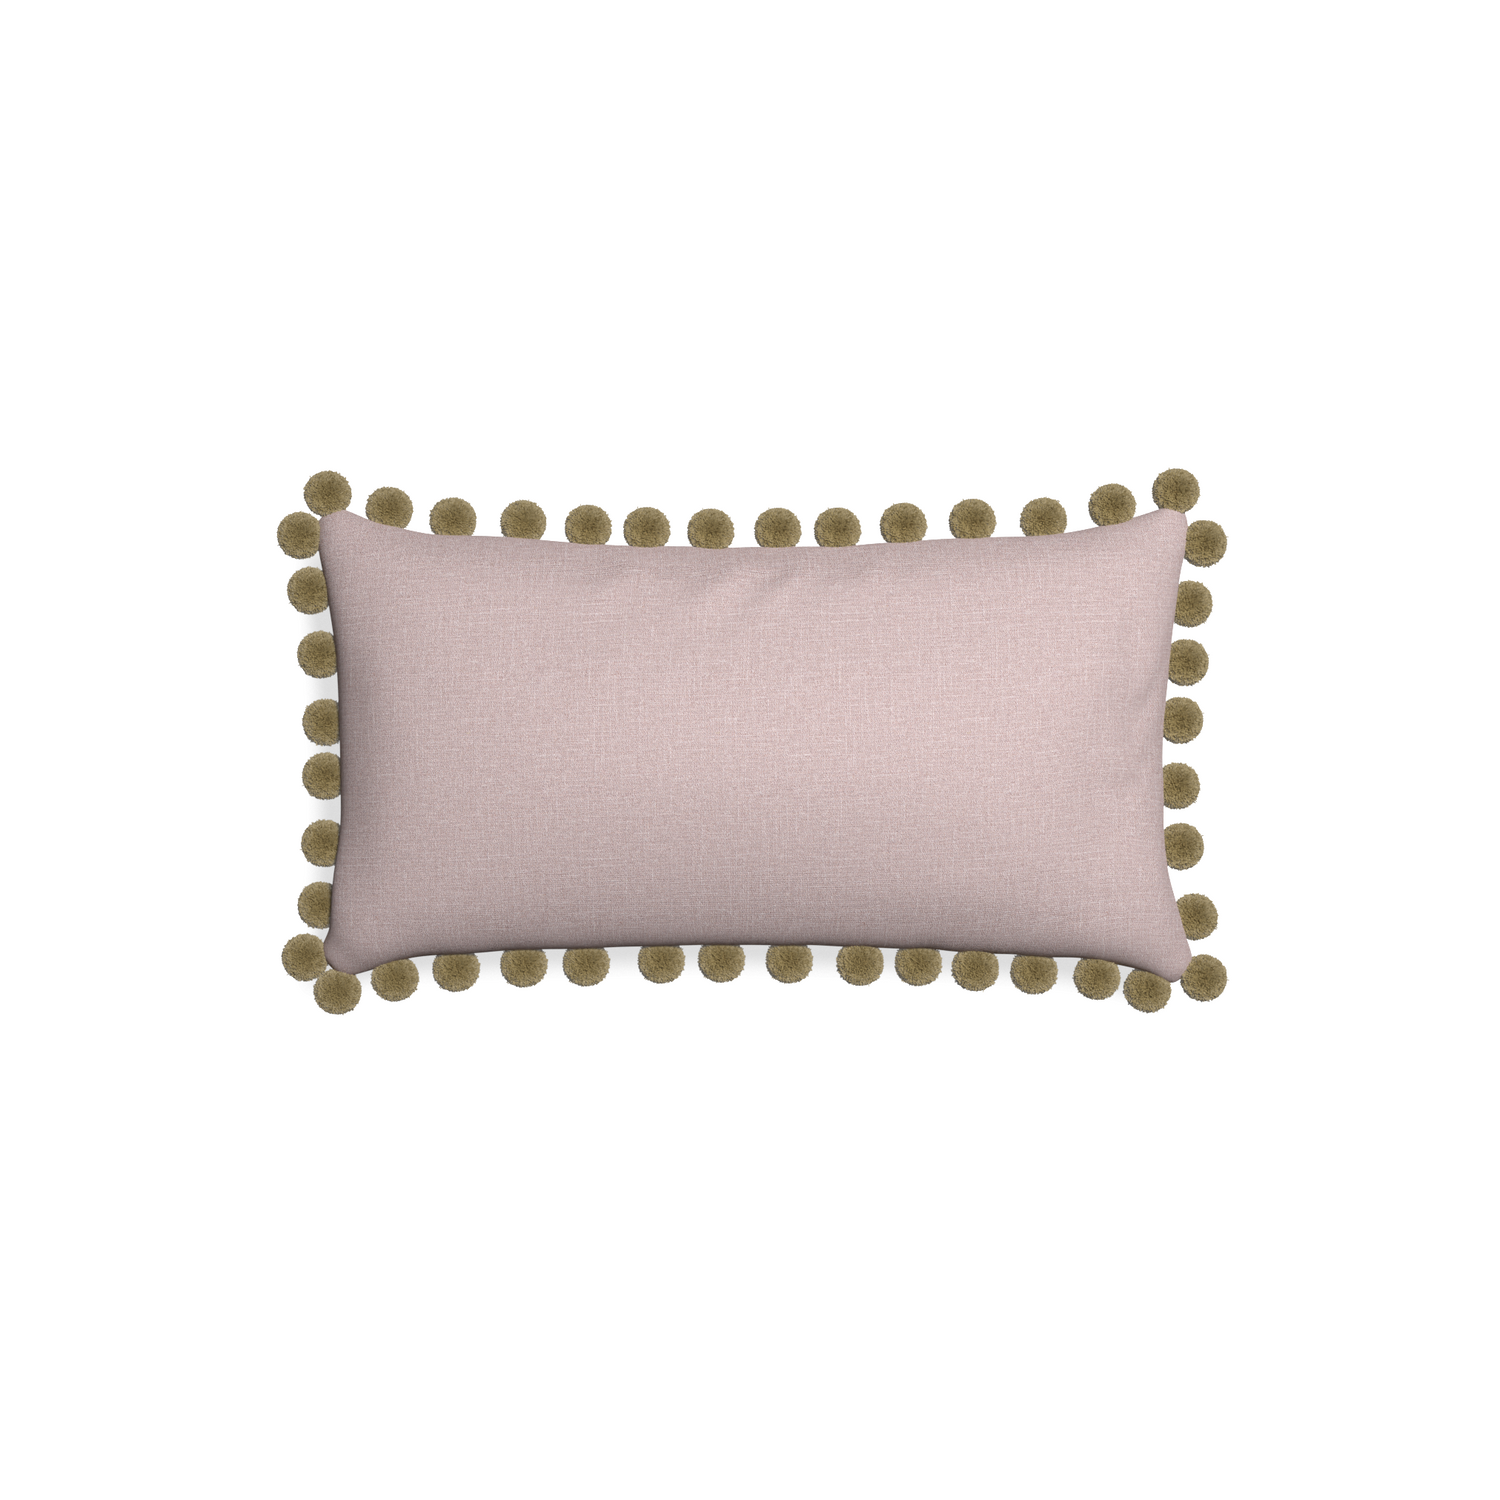 Petite-lumbar orchid custom mauve pinkpillow with olive pom pom on white background